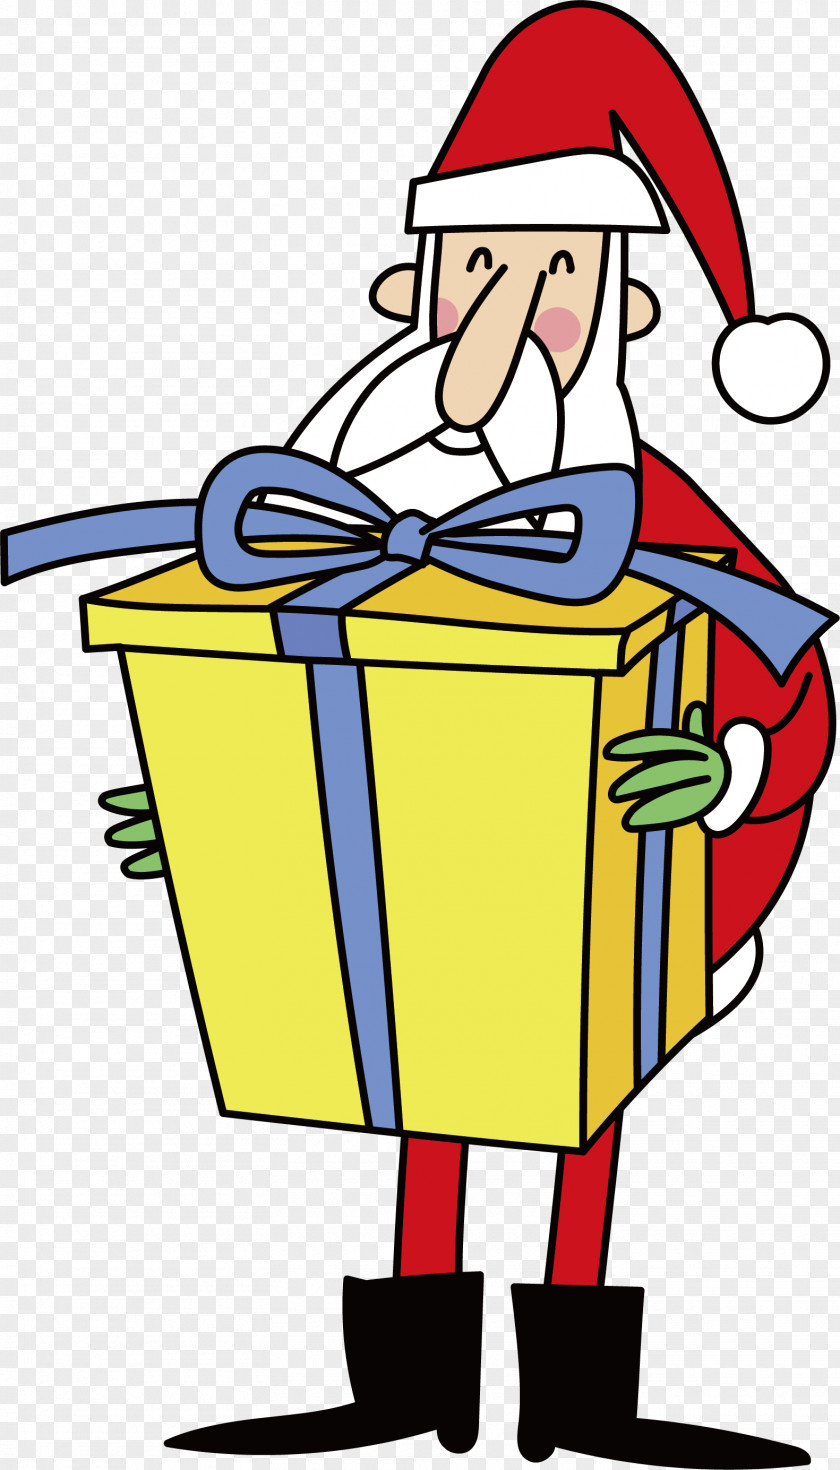 Santa Claus With A Gift Christmas Clip Art PNG